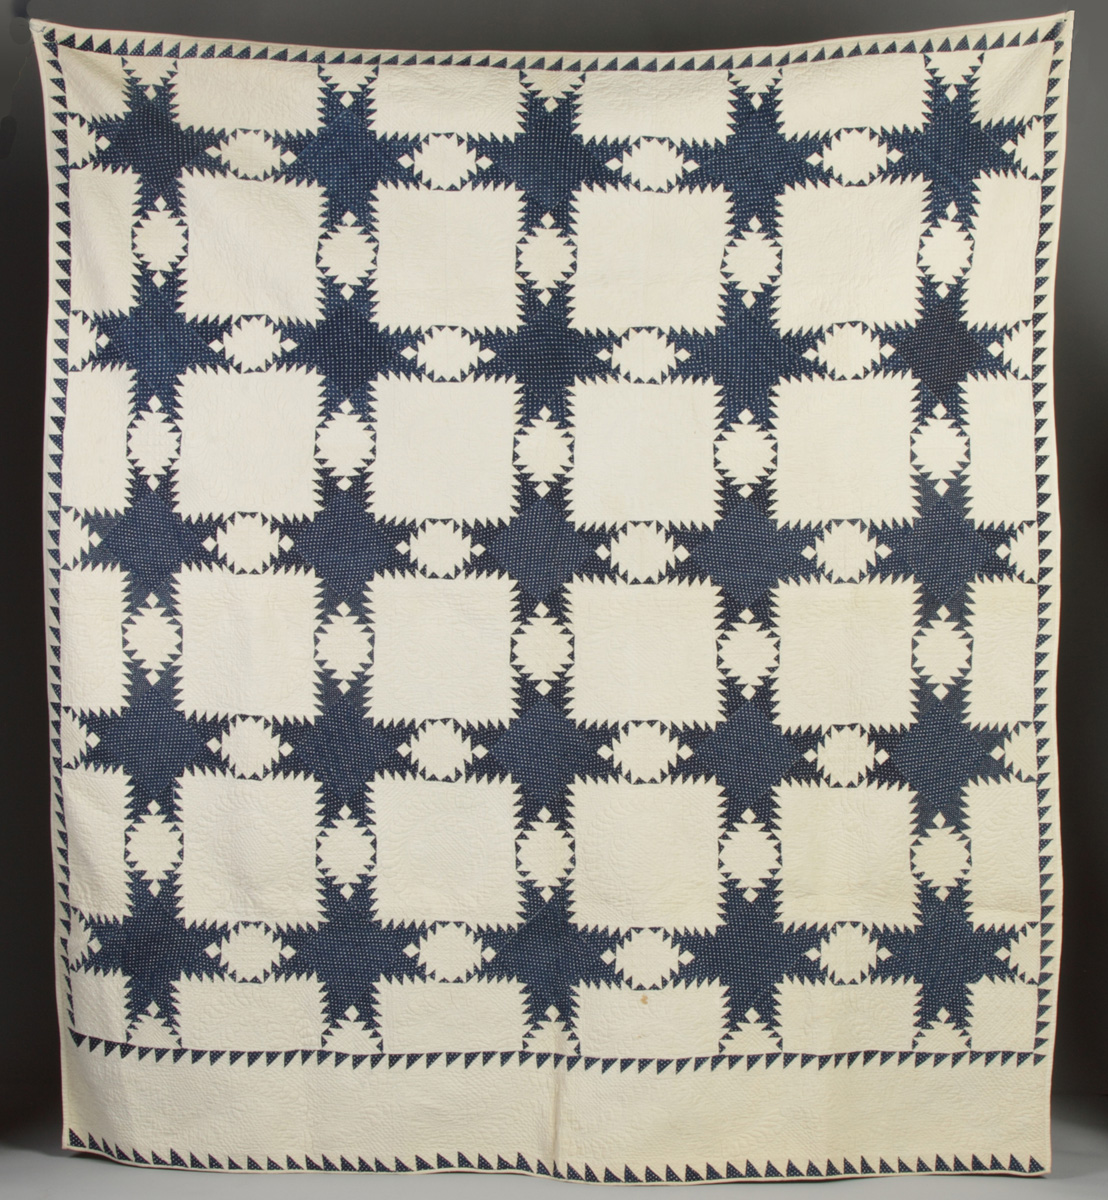 Dark Blue on White Patch Quilt Flying